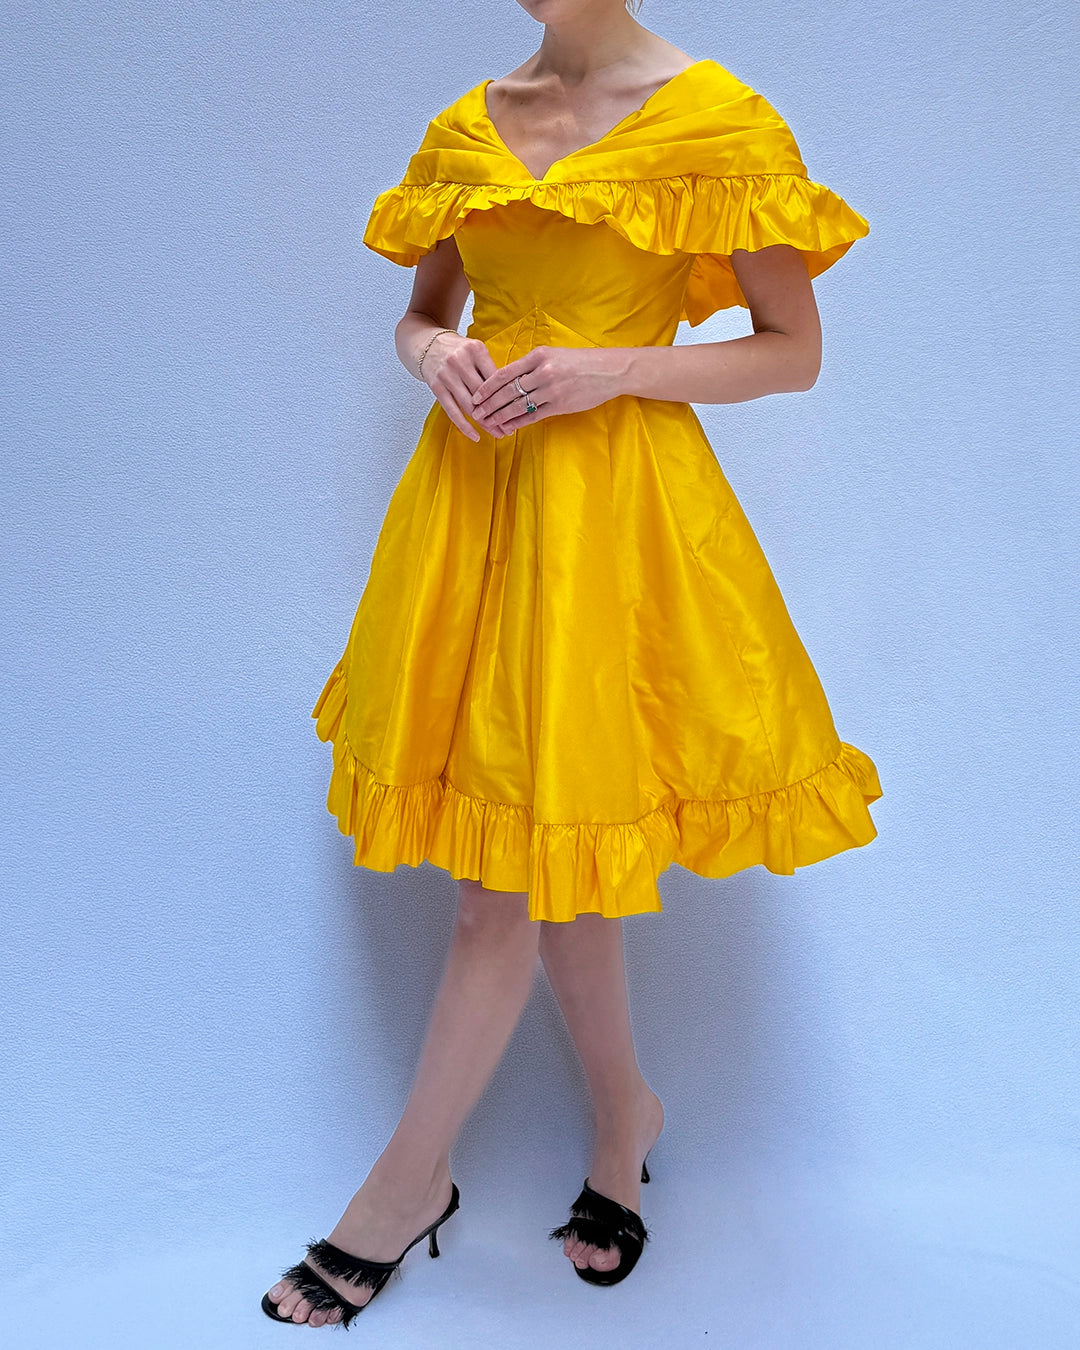 VIintage 1980s Arnold Scassi Cape Collar Ruffled Cocktail Dress